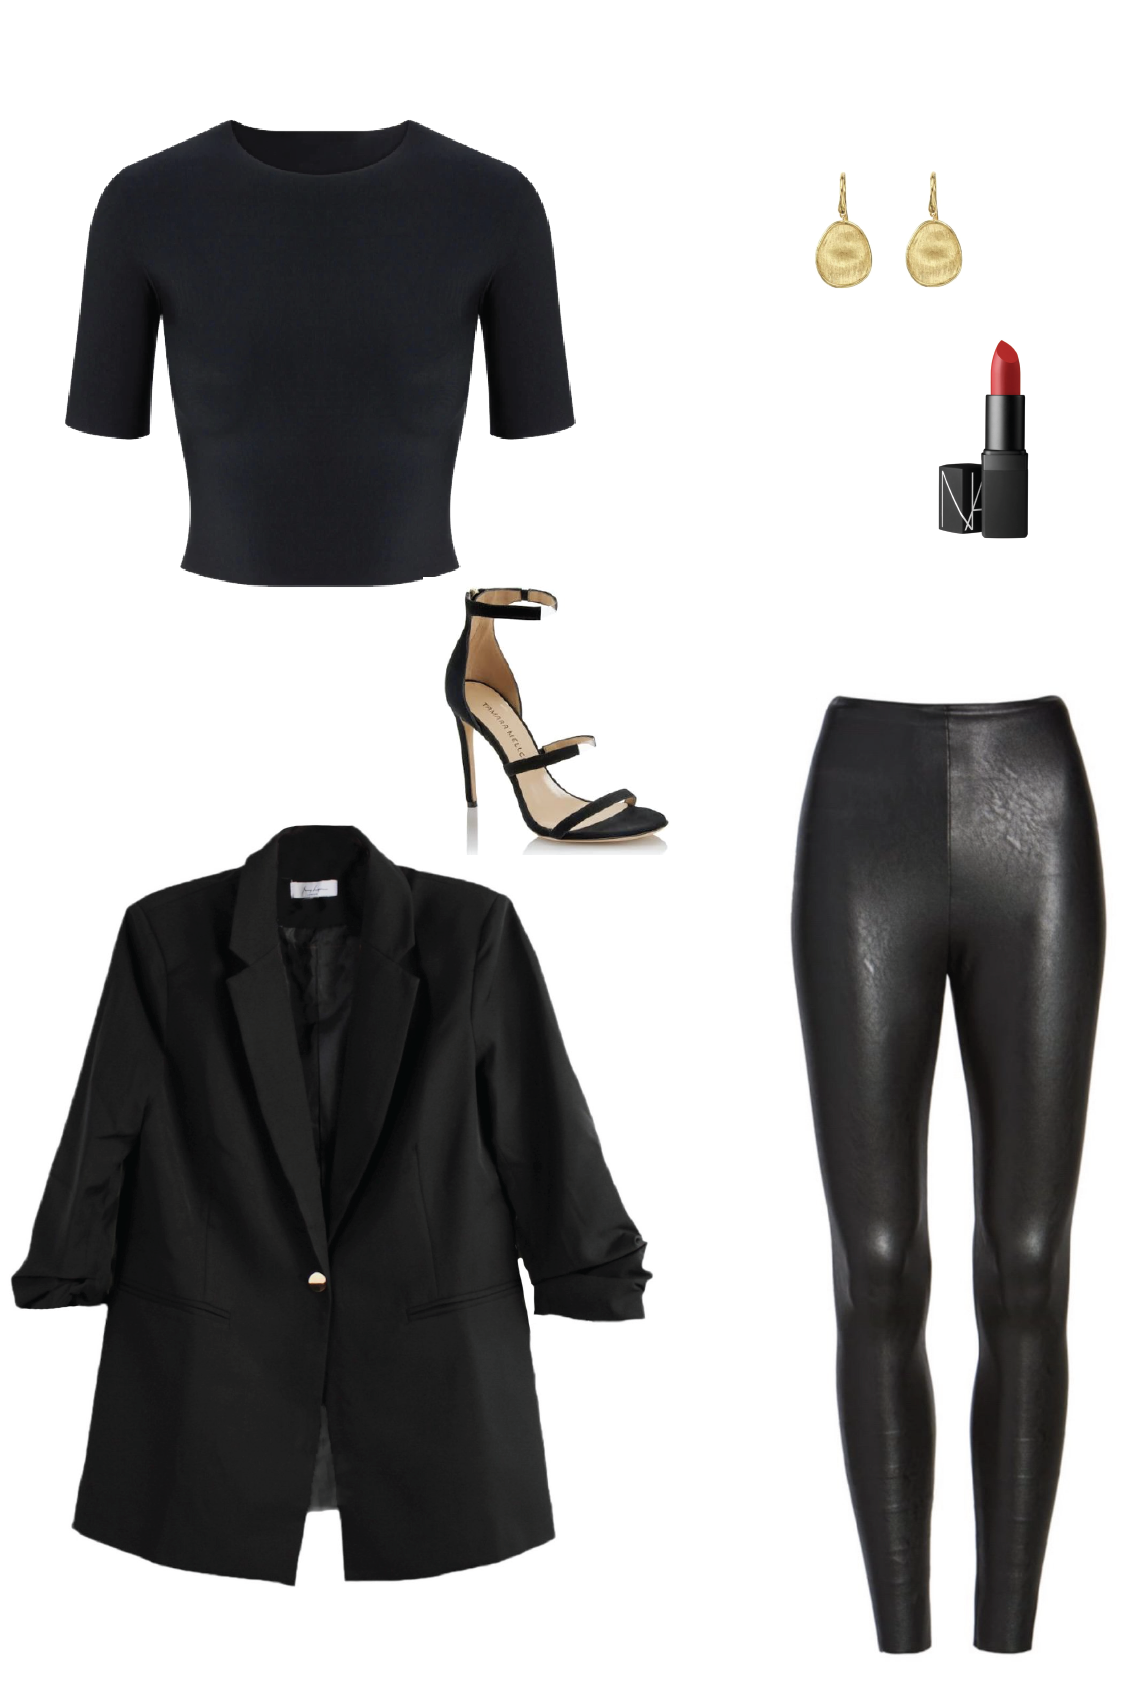 Polyvore 2  Outfits with leggings, Shiny clothes, Shiny leggings